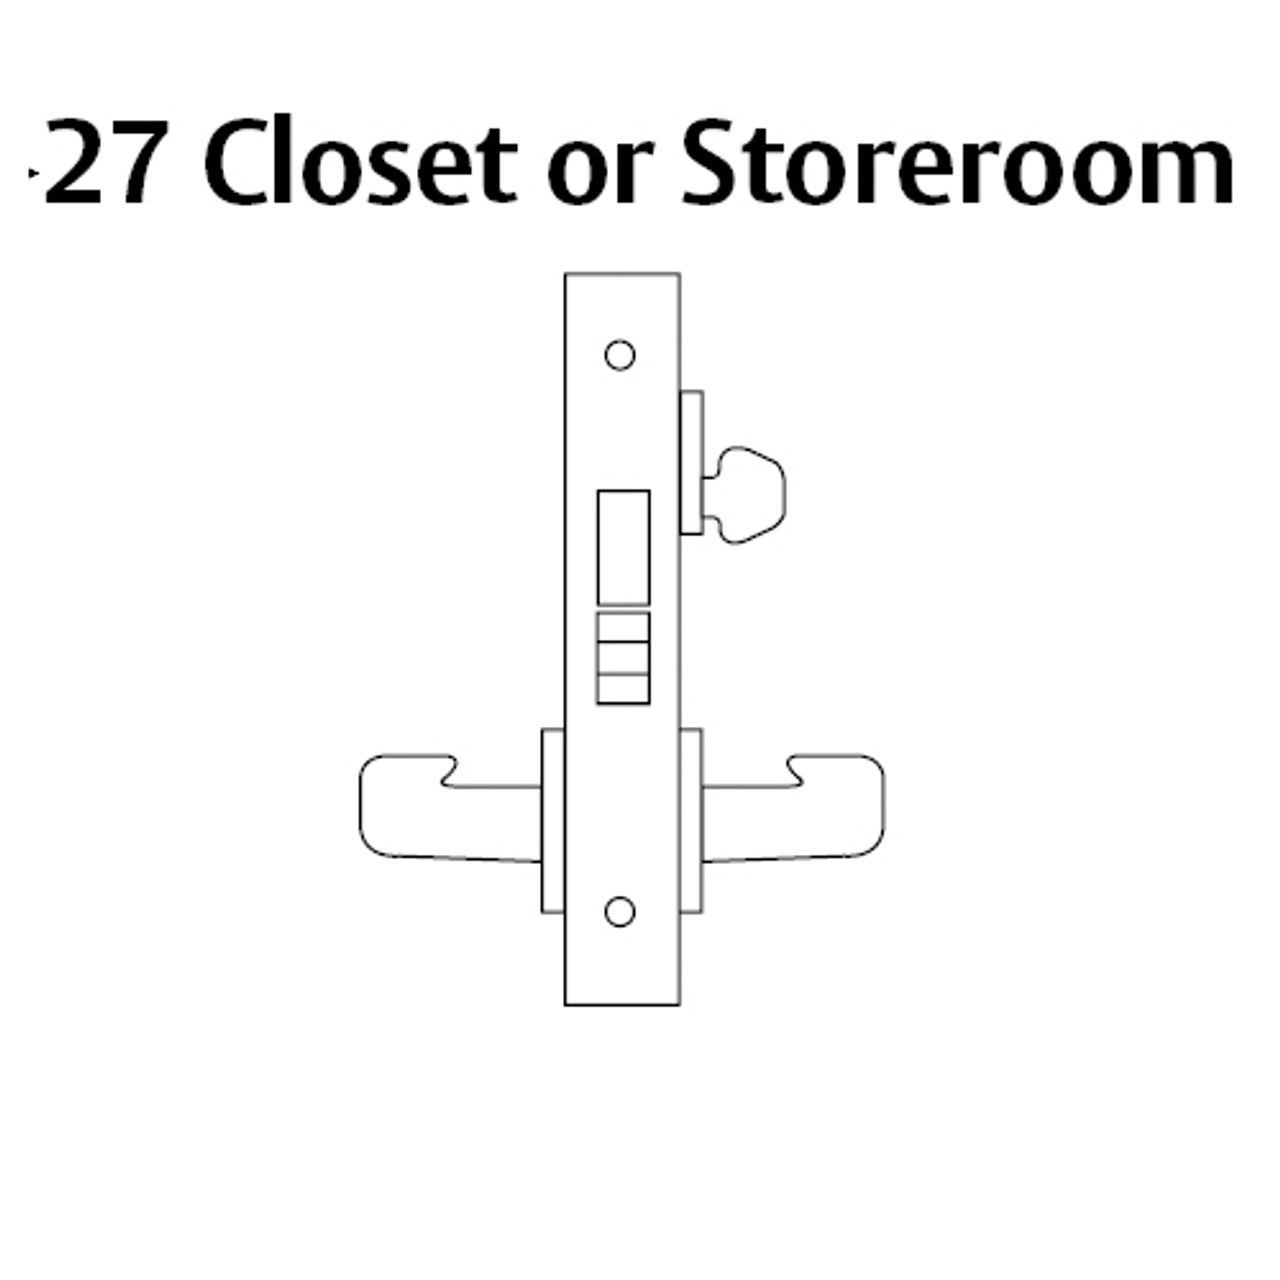 8227-LNW-26 Sargent 8200 Series Closet or Storeroom Mortise Lock with LNW Lever Trim and Deadbolt in Bright Chrome